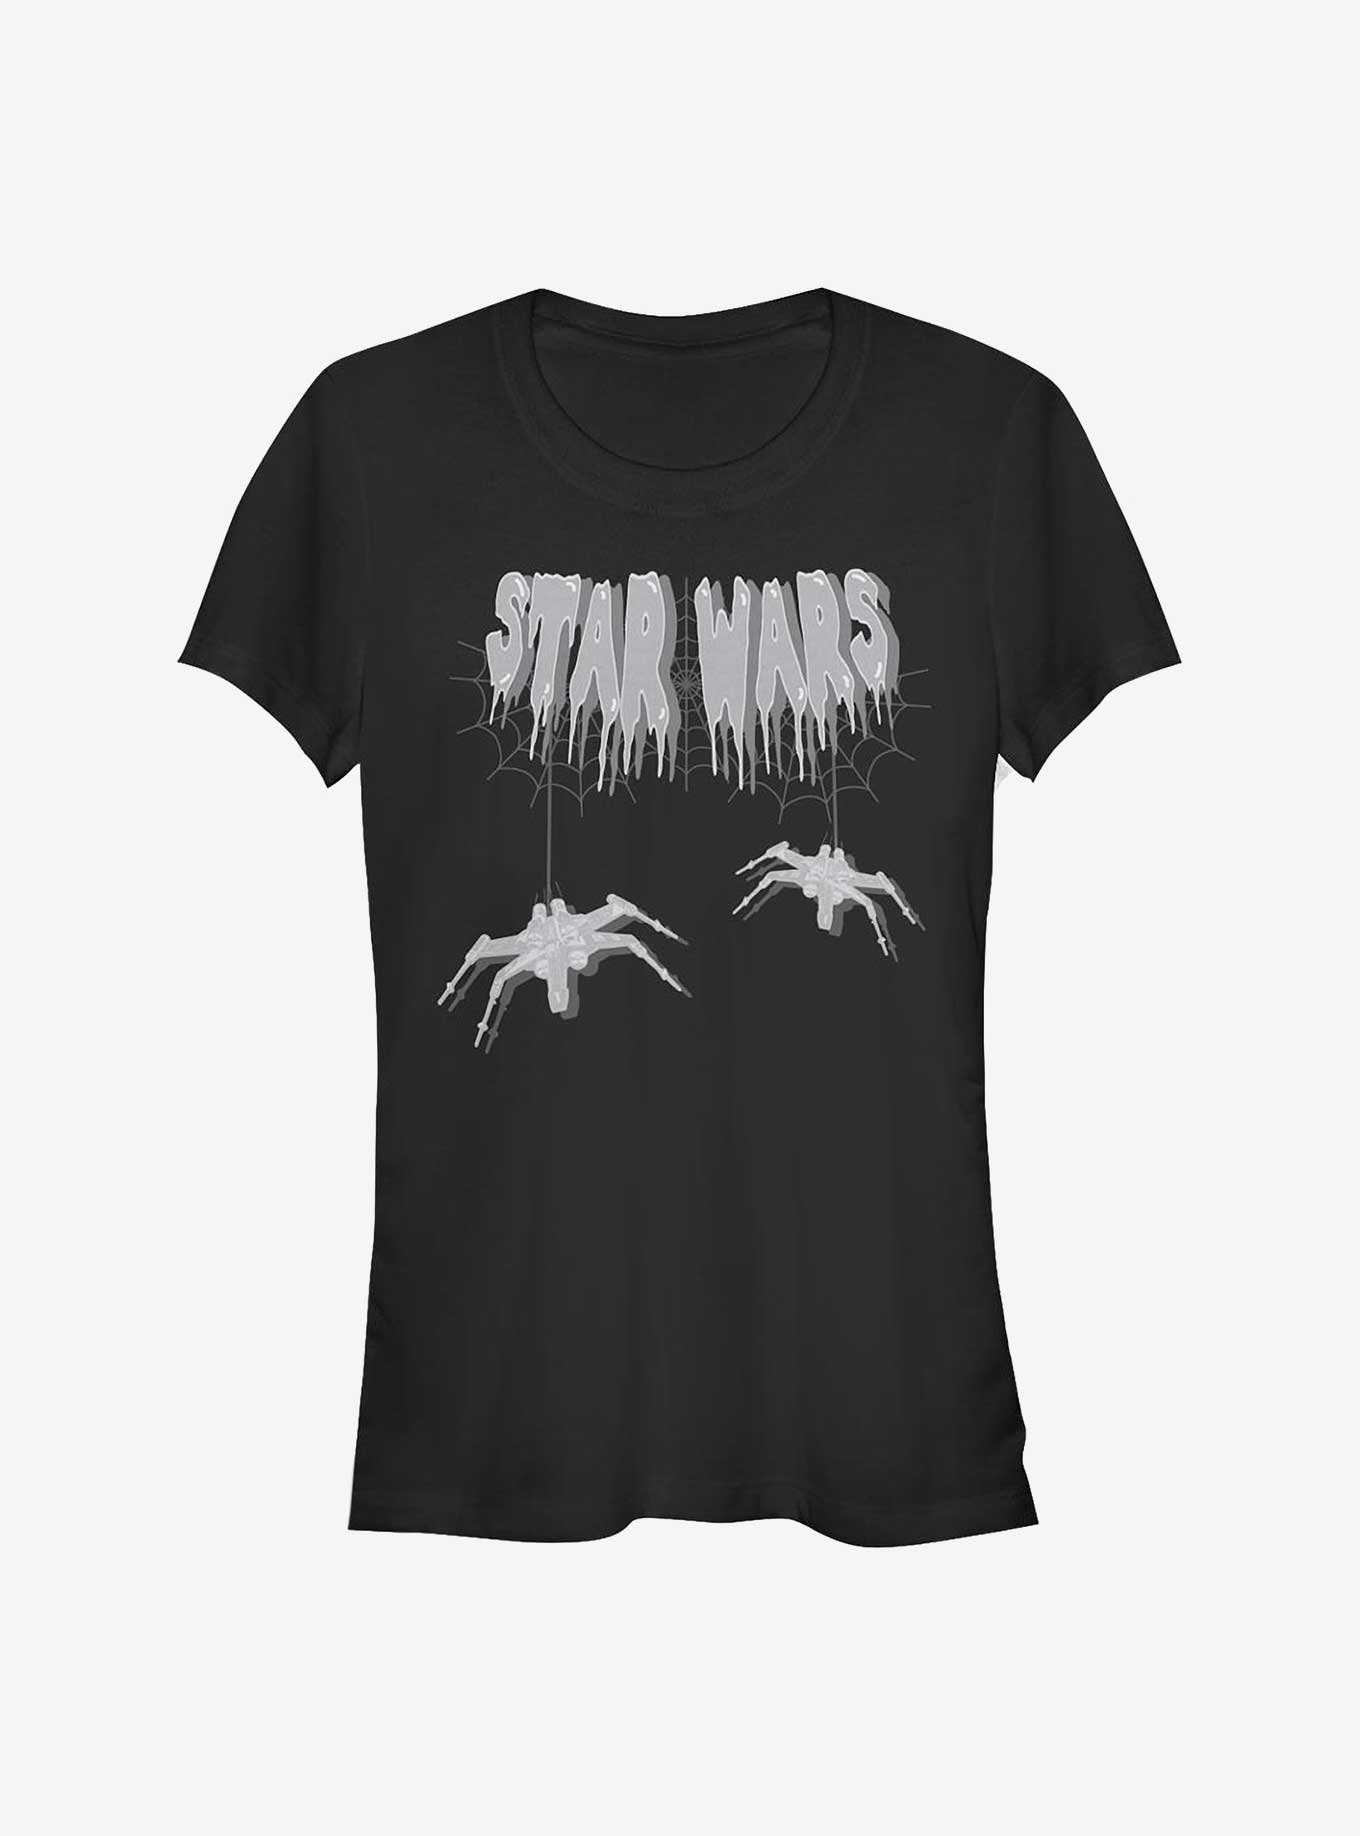 Star Wars Spooky Spiders X-Wing Logo Girls T-Shirt, , hi-res